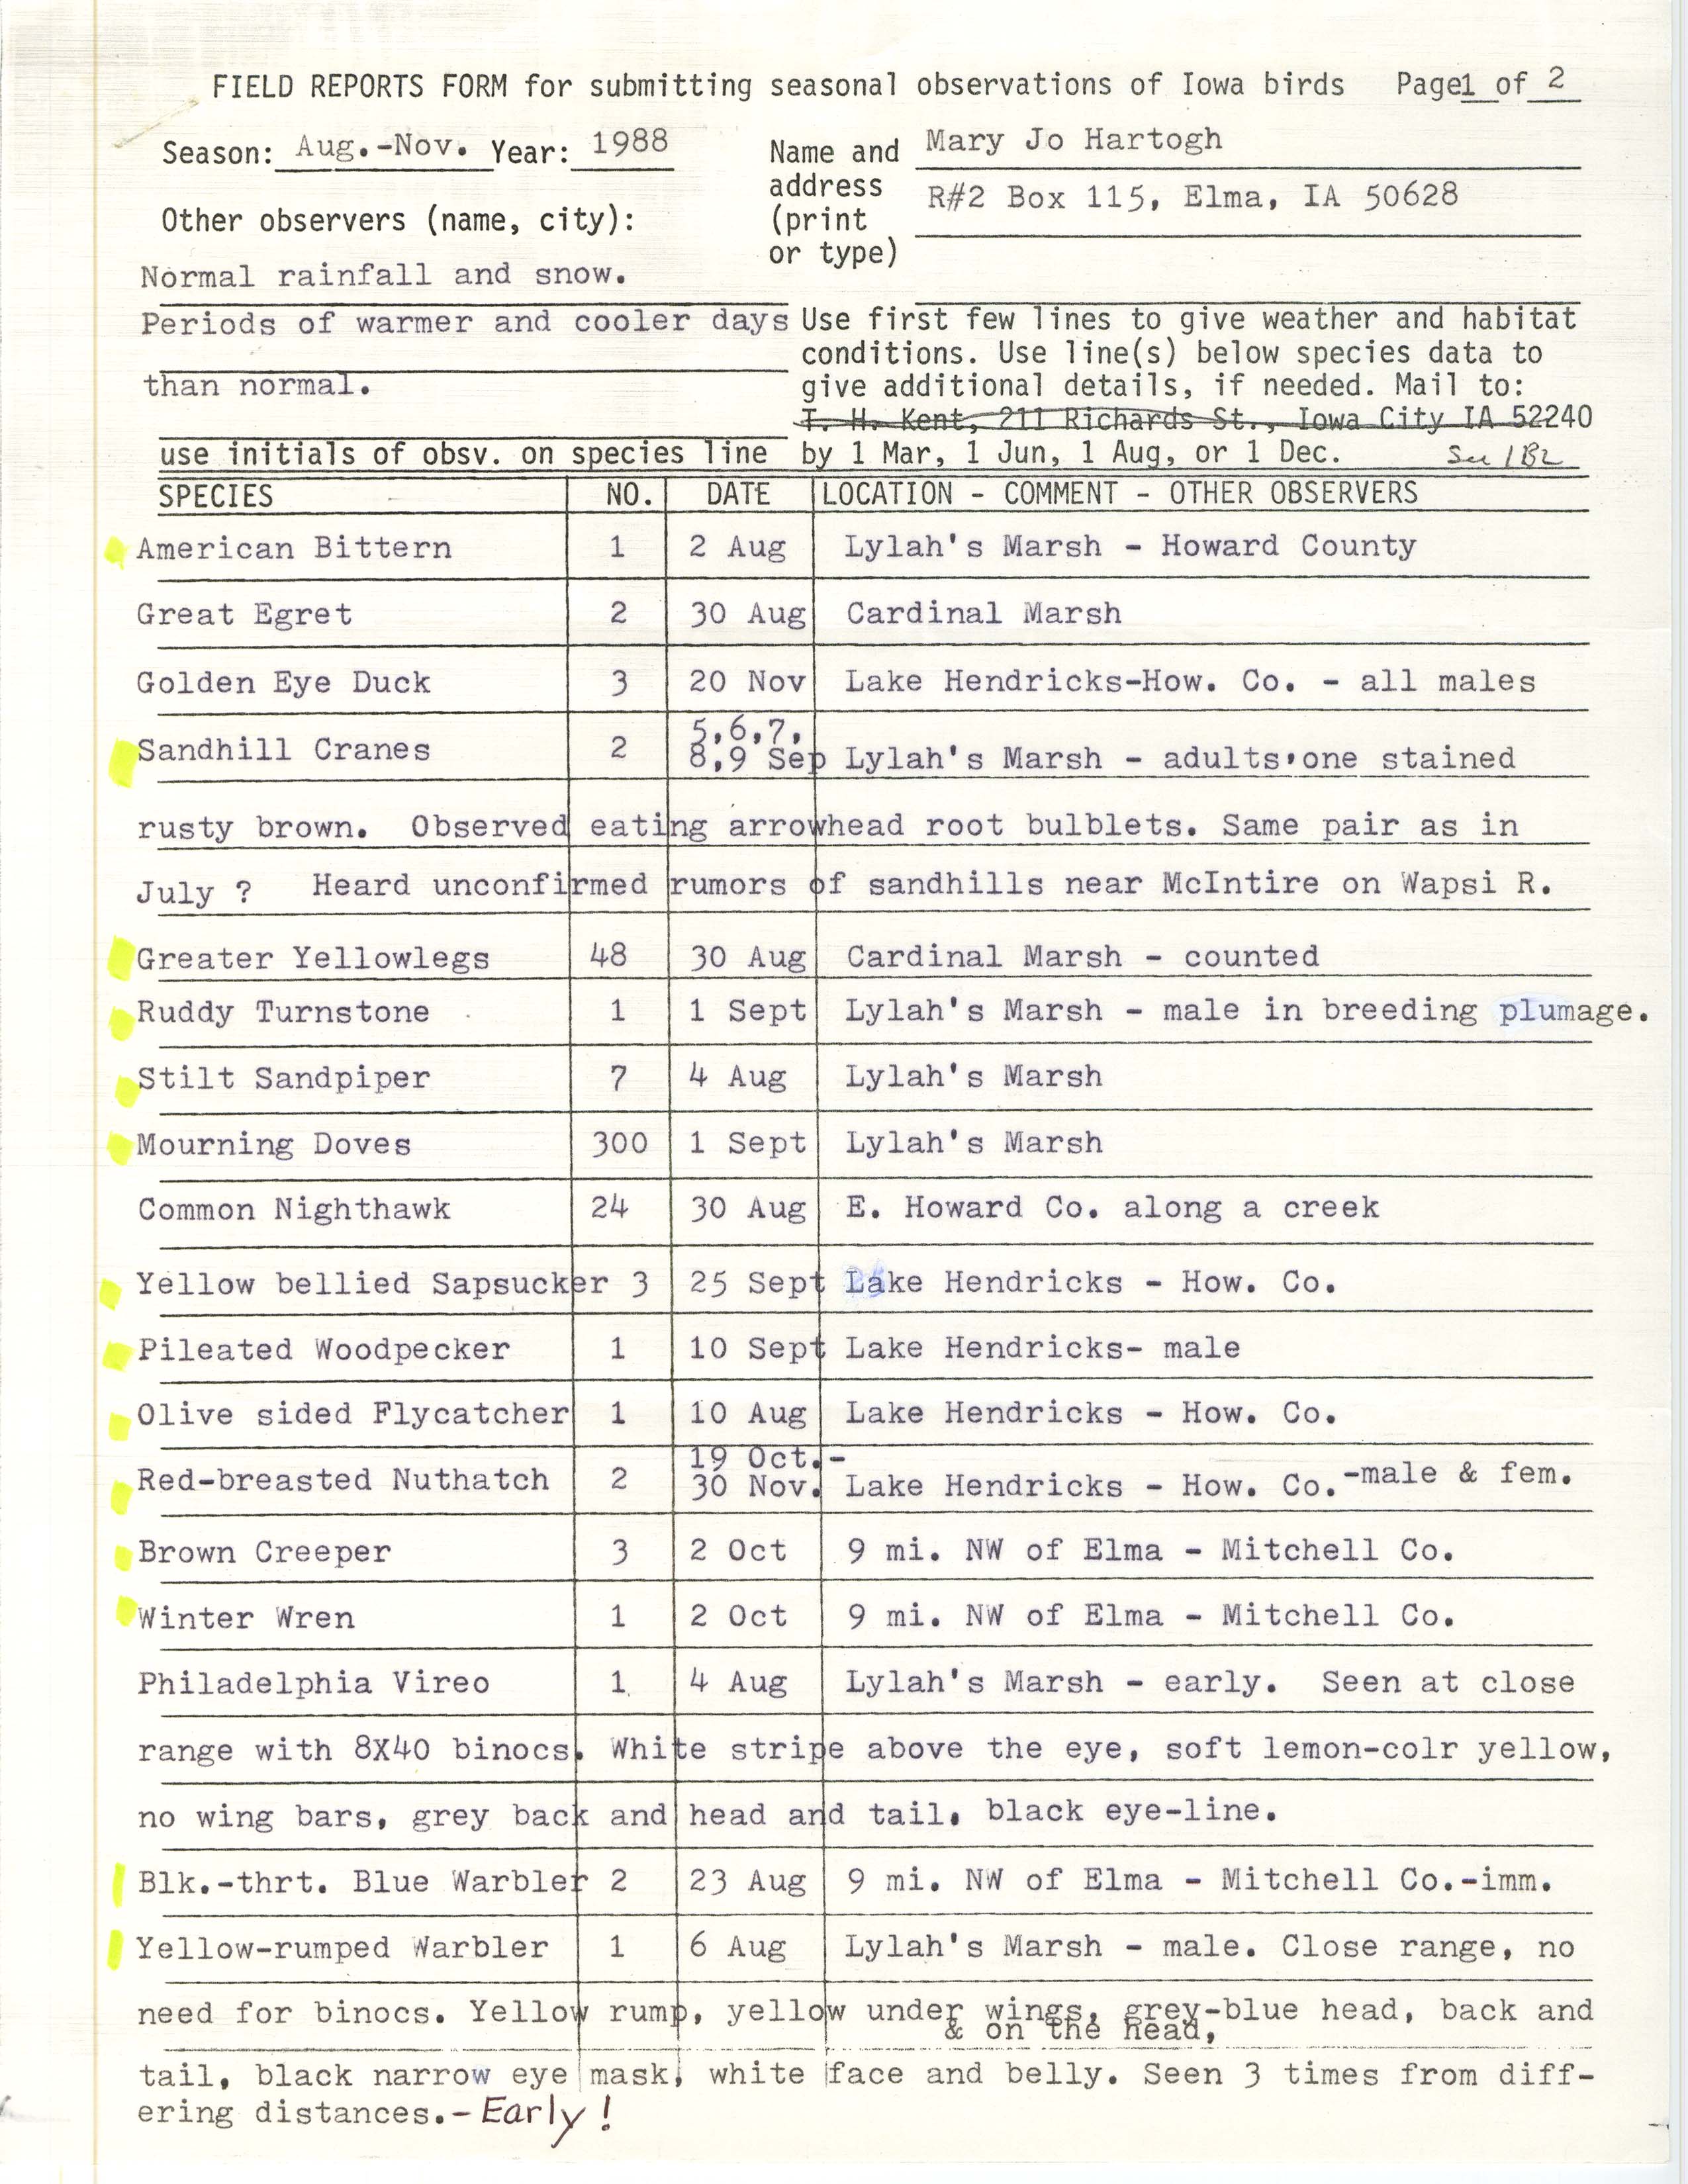 Field reports form for submitting seasonal observations of Iowa birds, Mary Jo Hartogh, fall 1988